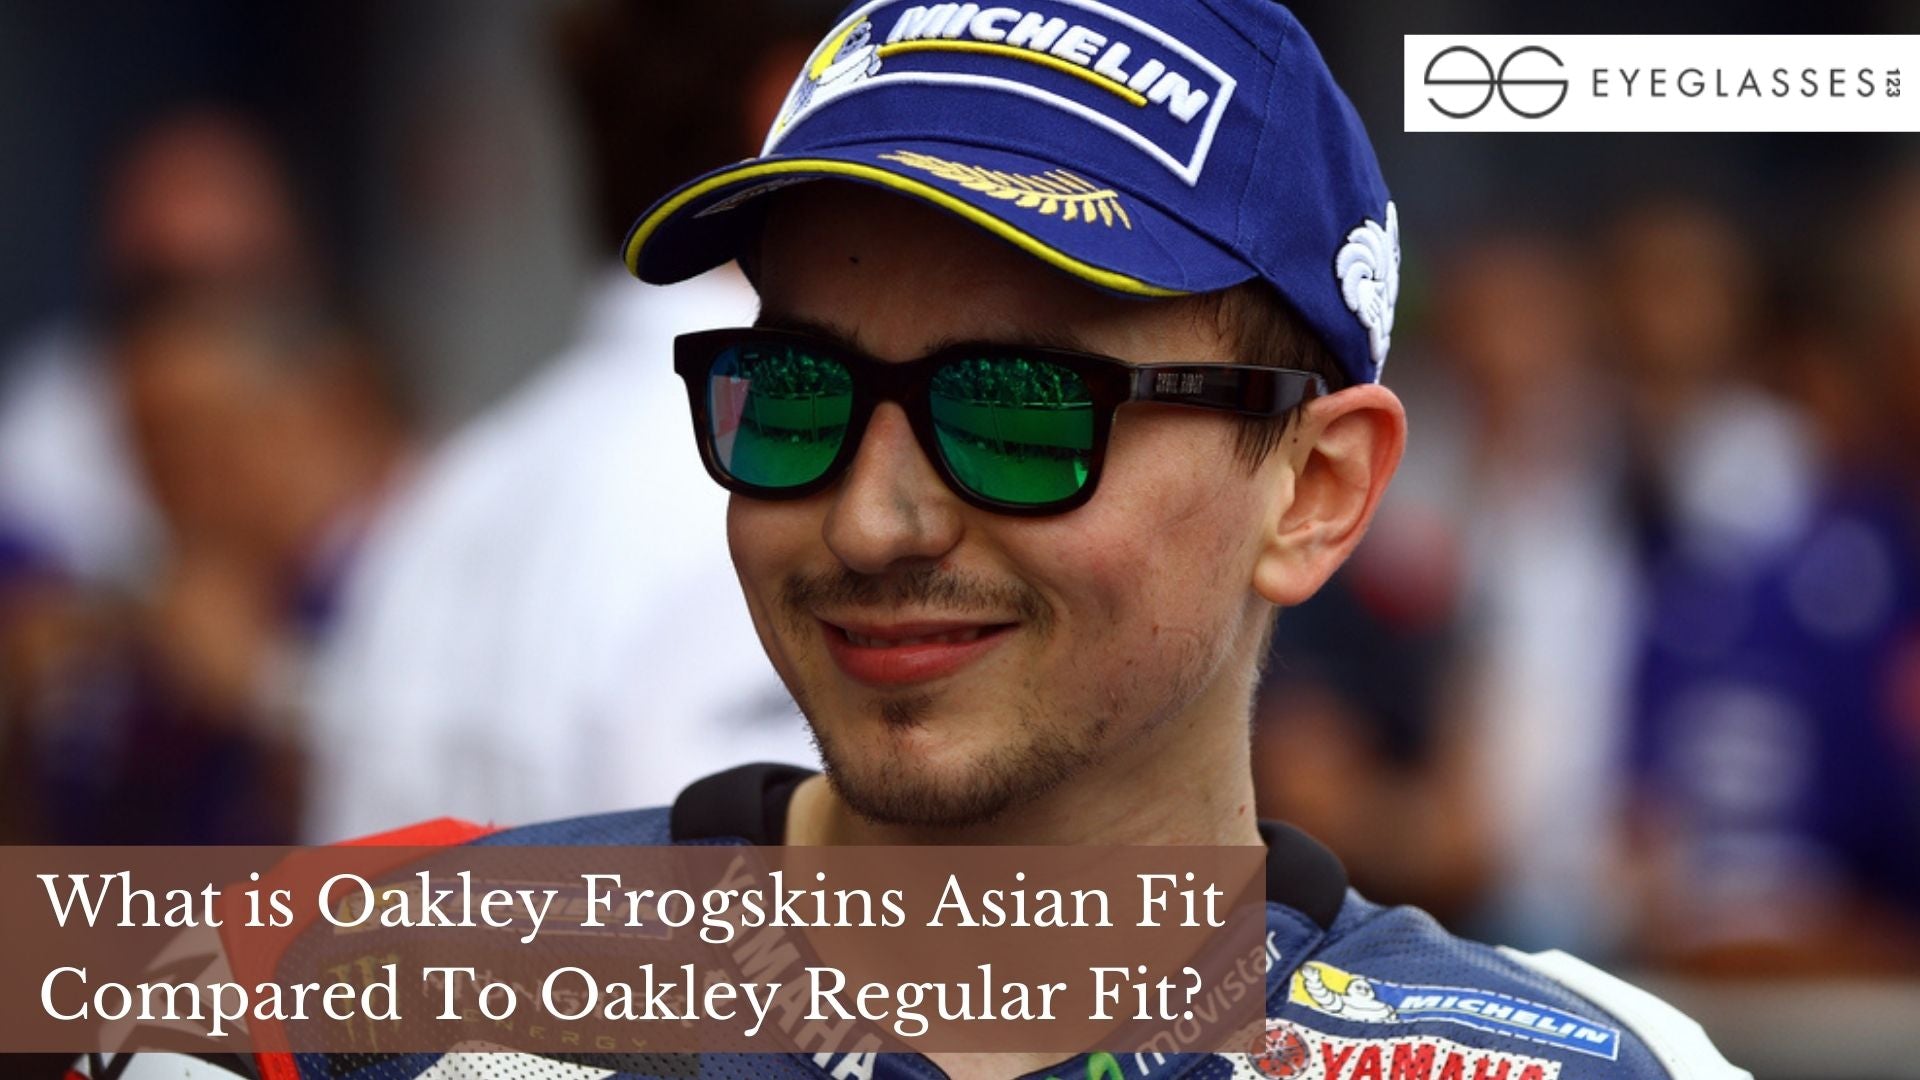 What is Oakley Frogskins Asian Fit Compared To Oakley Regular Fit?